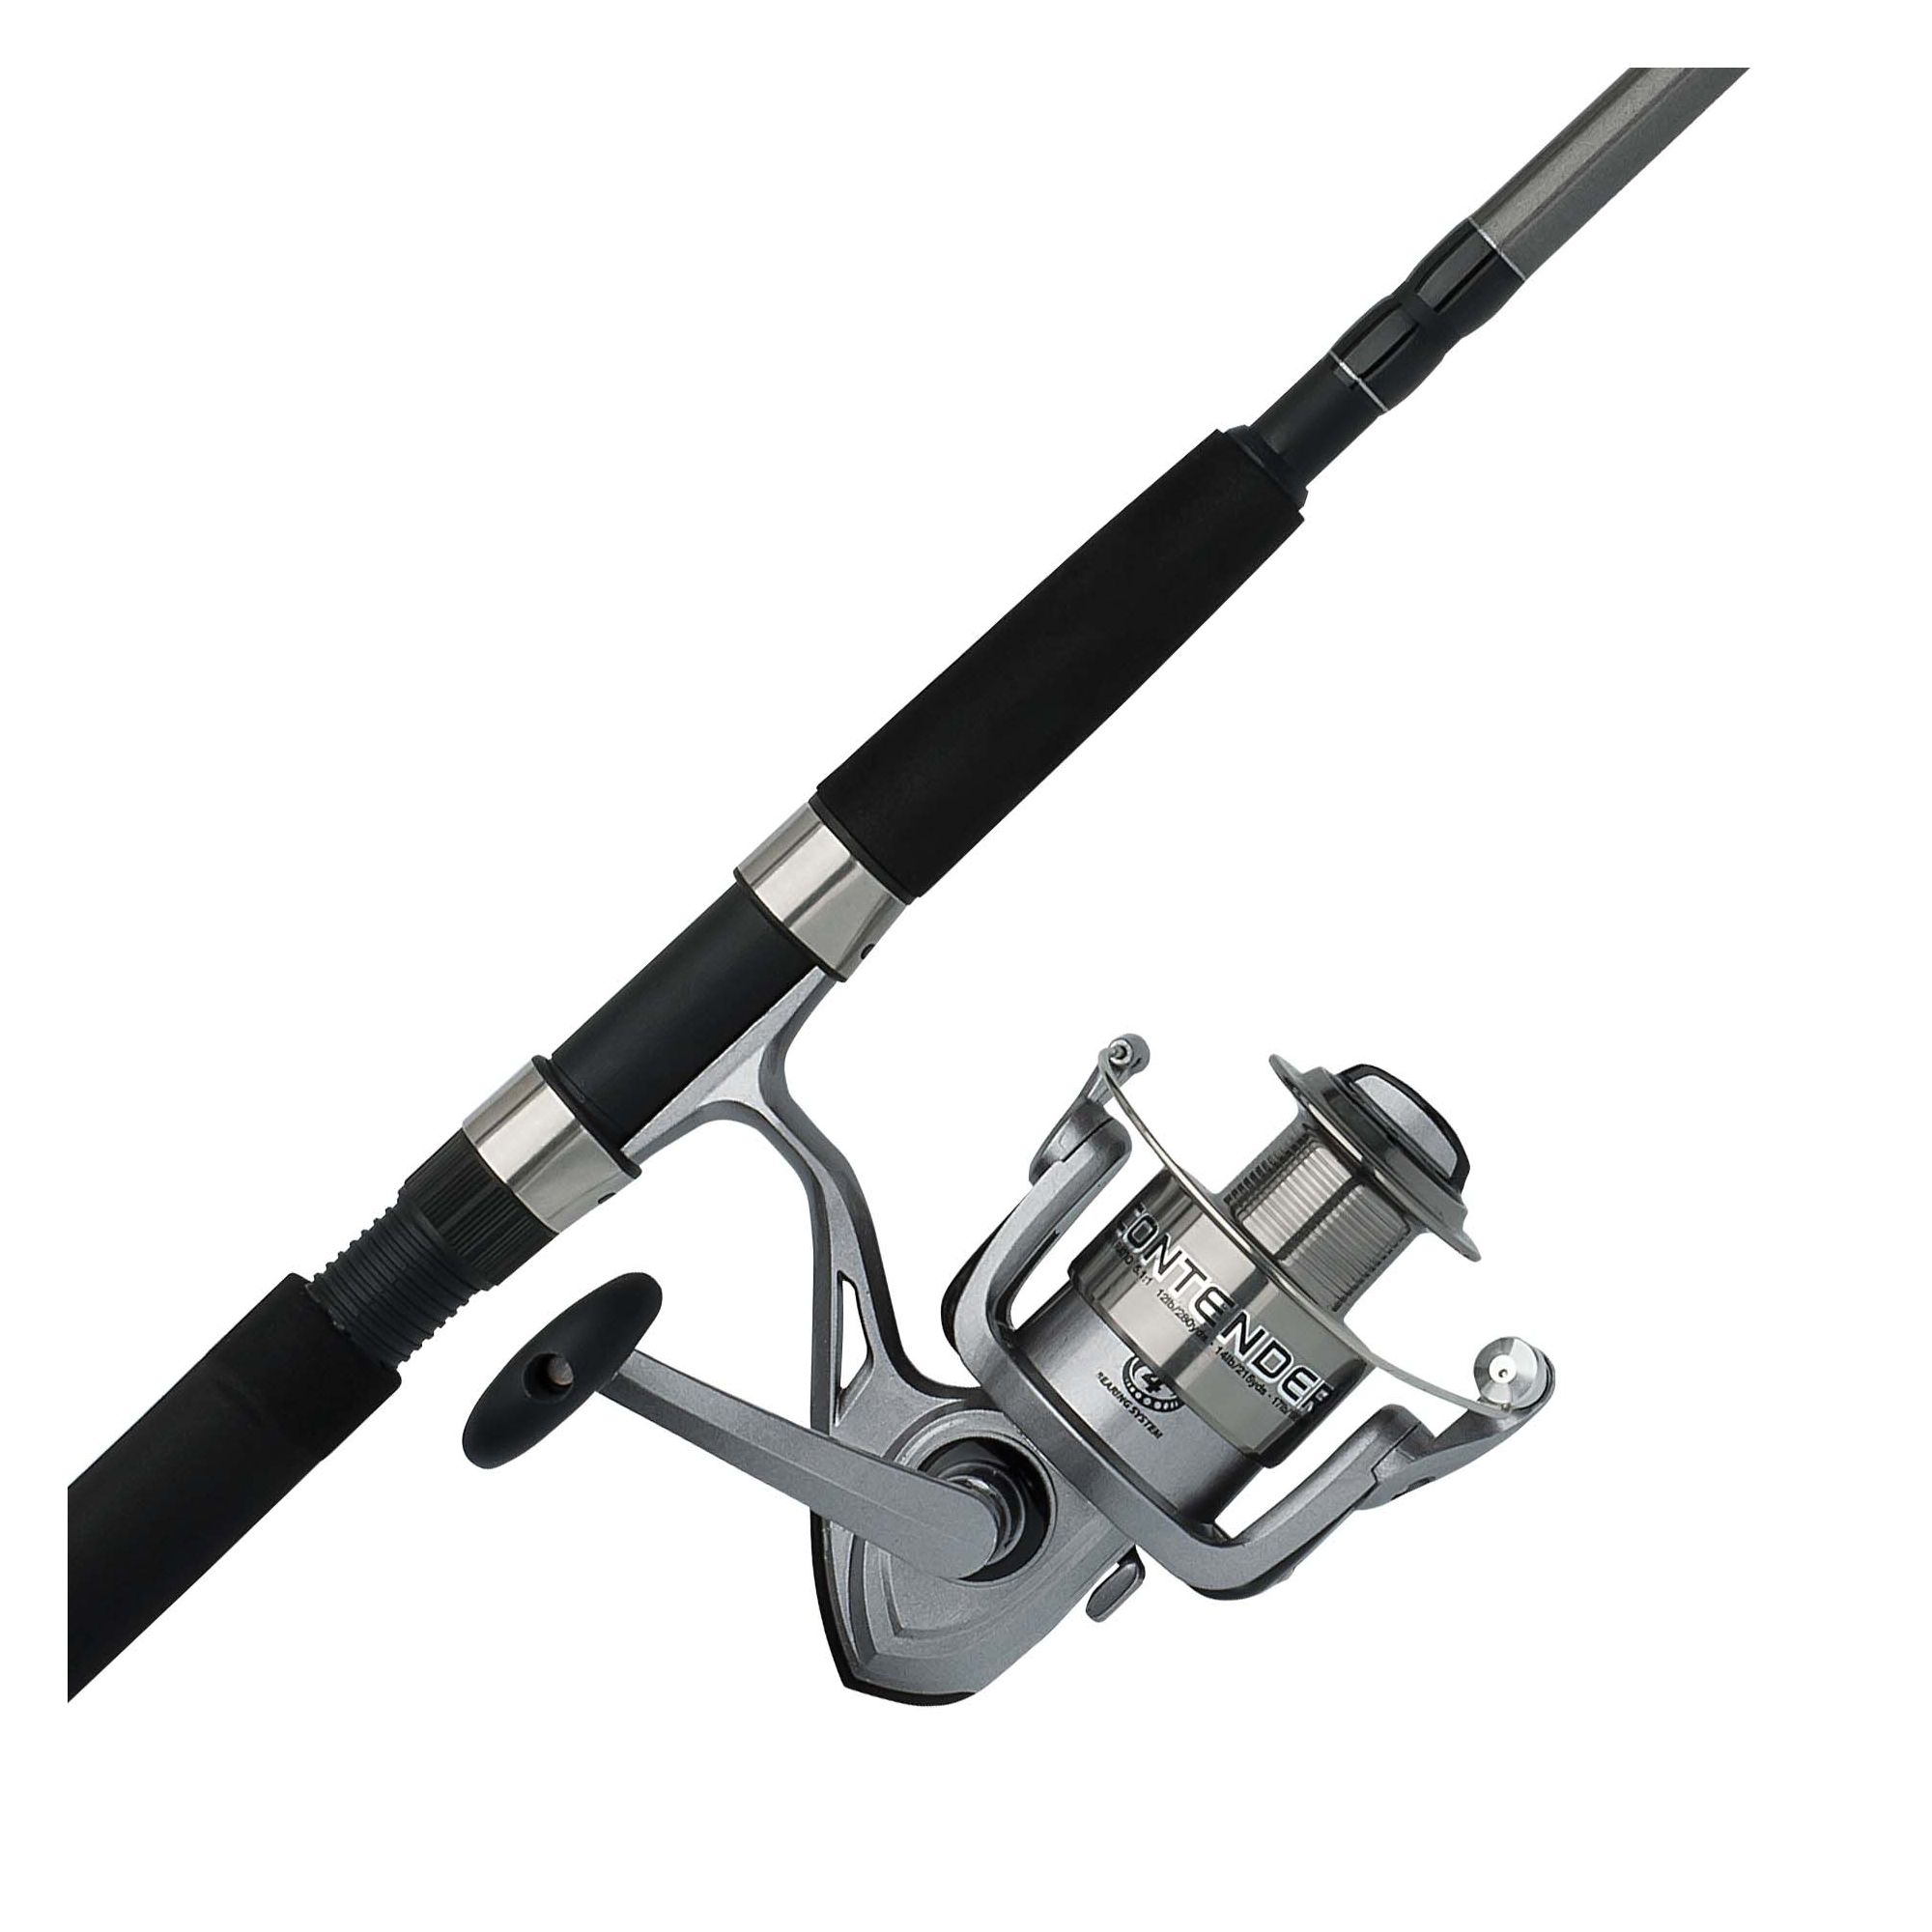 Shakespeare Contender BW 9' RH/LH Spin Fishing Combo